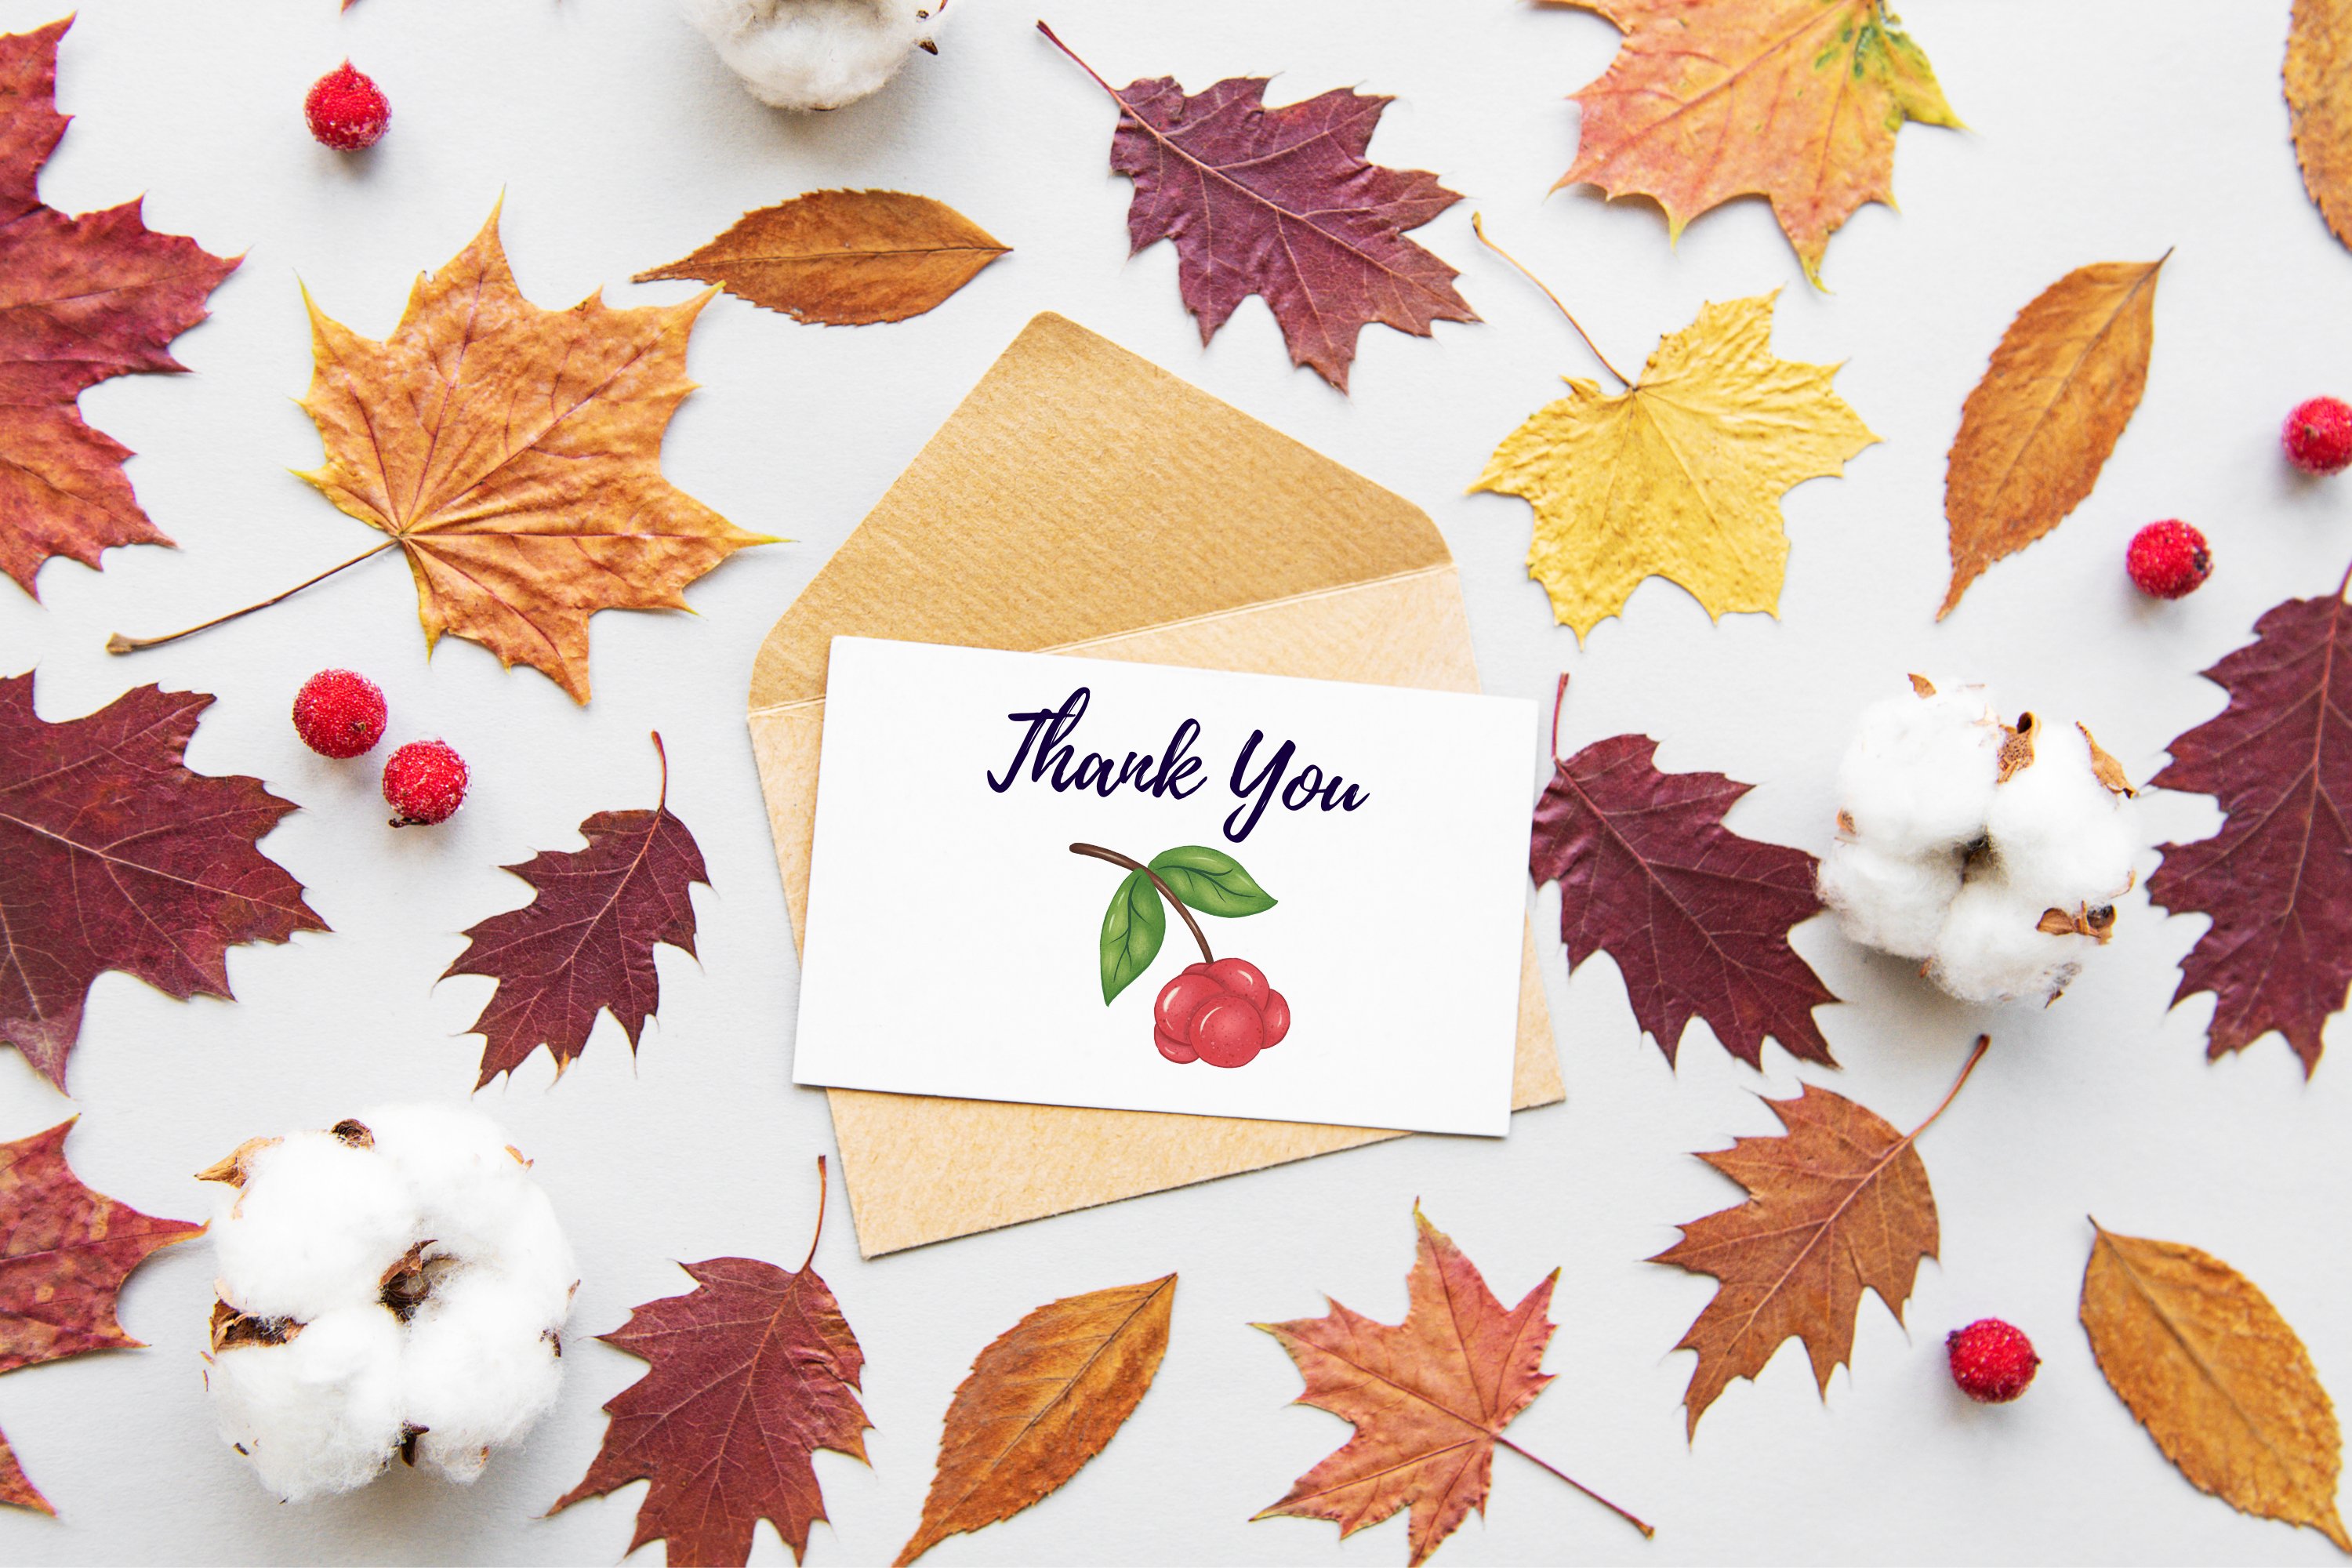 White card with black lettering "Thank you" and illustration on the craft envelope on a gray background with fall leaves.